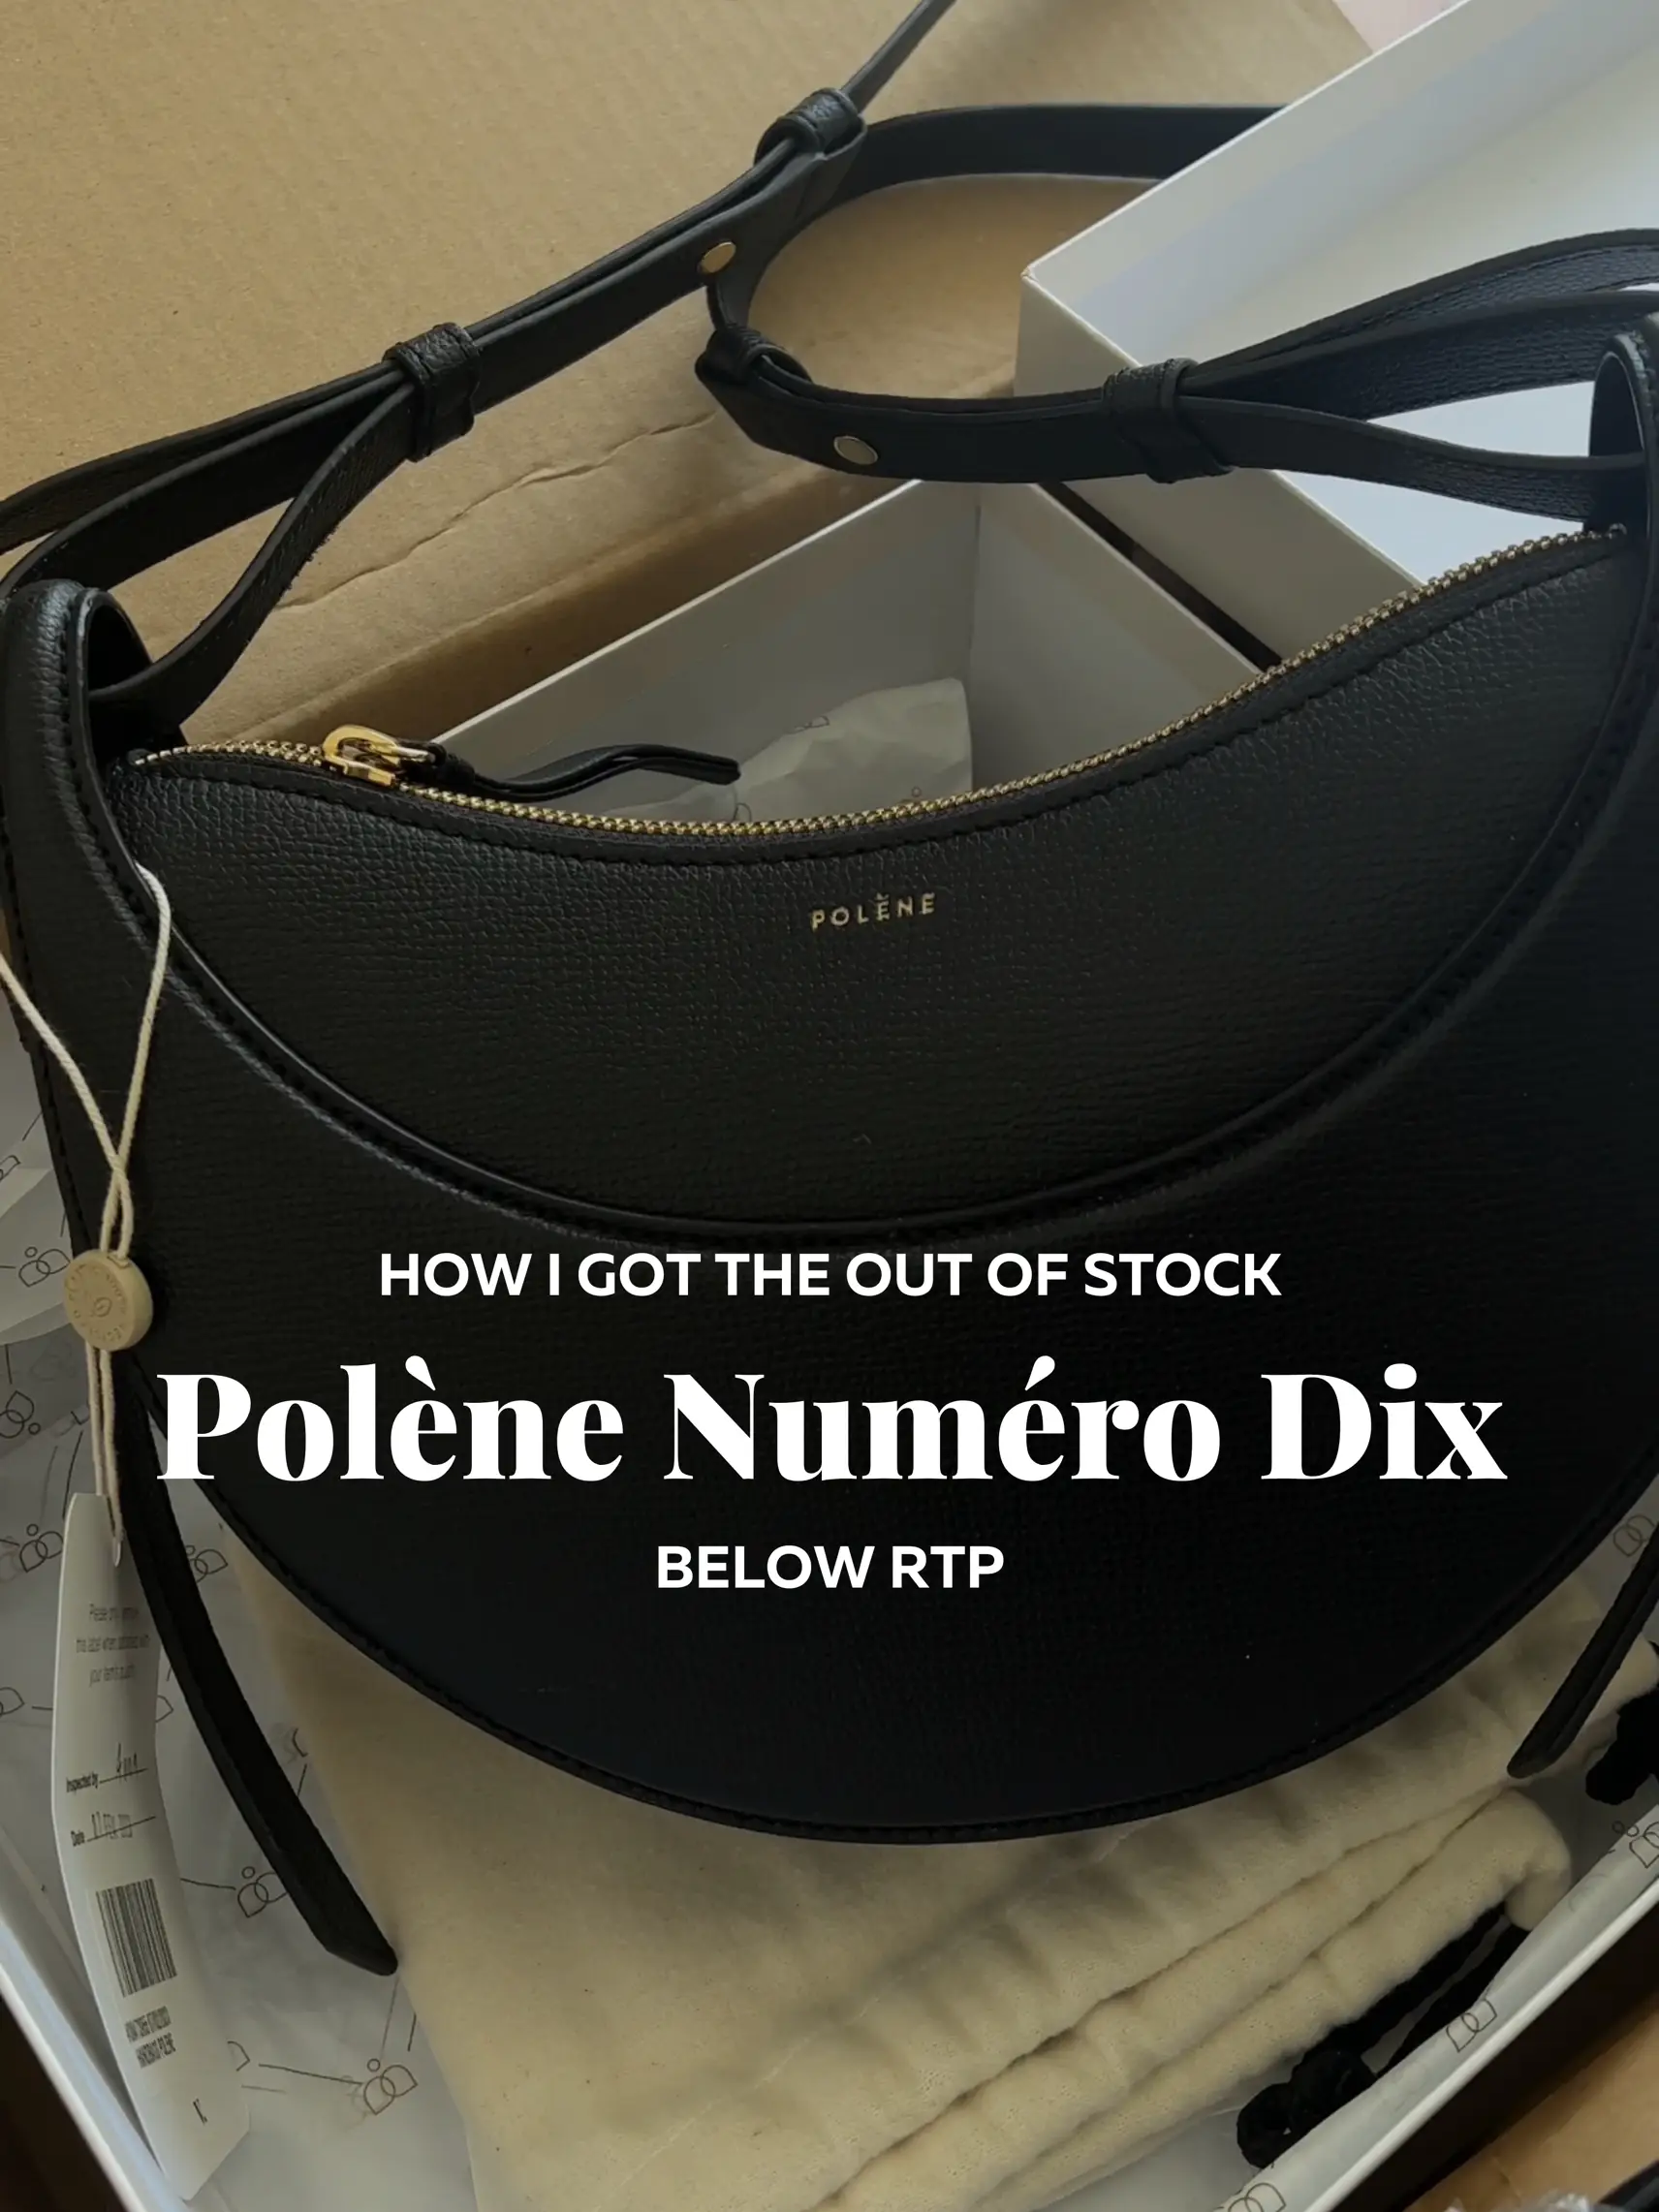 How I got the OUT OF STOCK Polene bag at $170 LESS